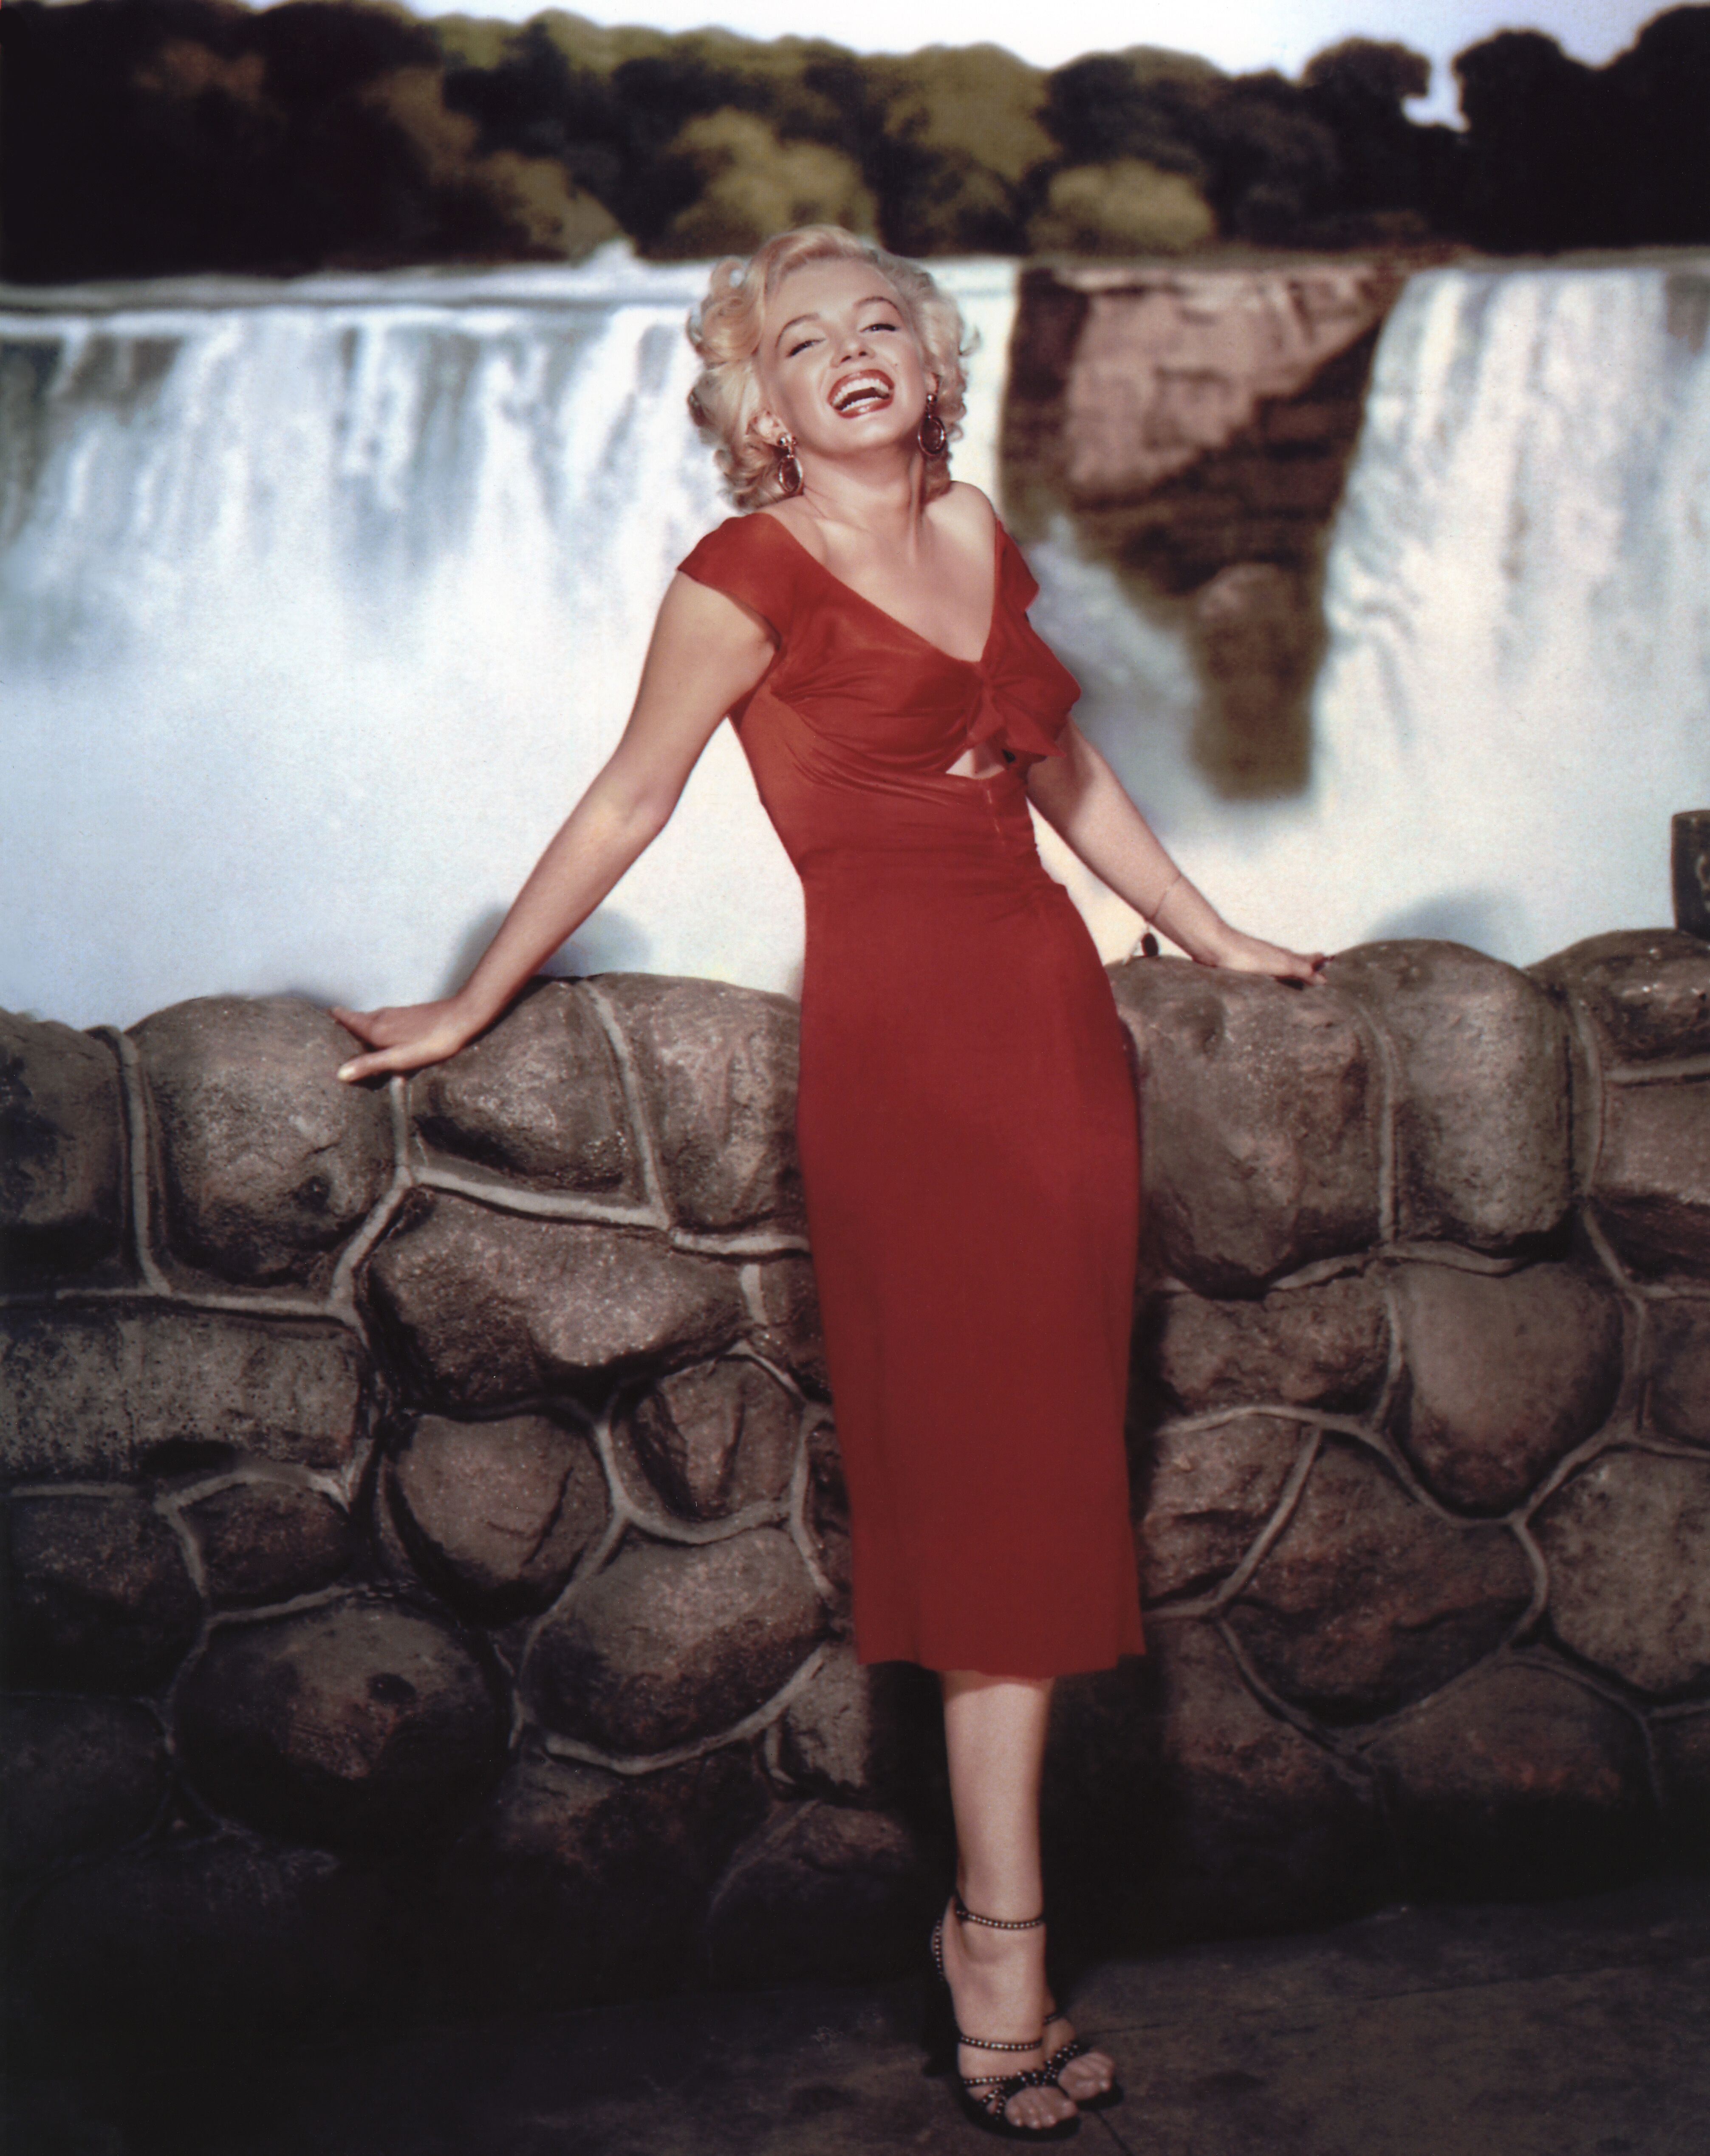  Marilyn Monroe on the set of the 1953 film, "Niagara" | Source: Getty Images